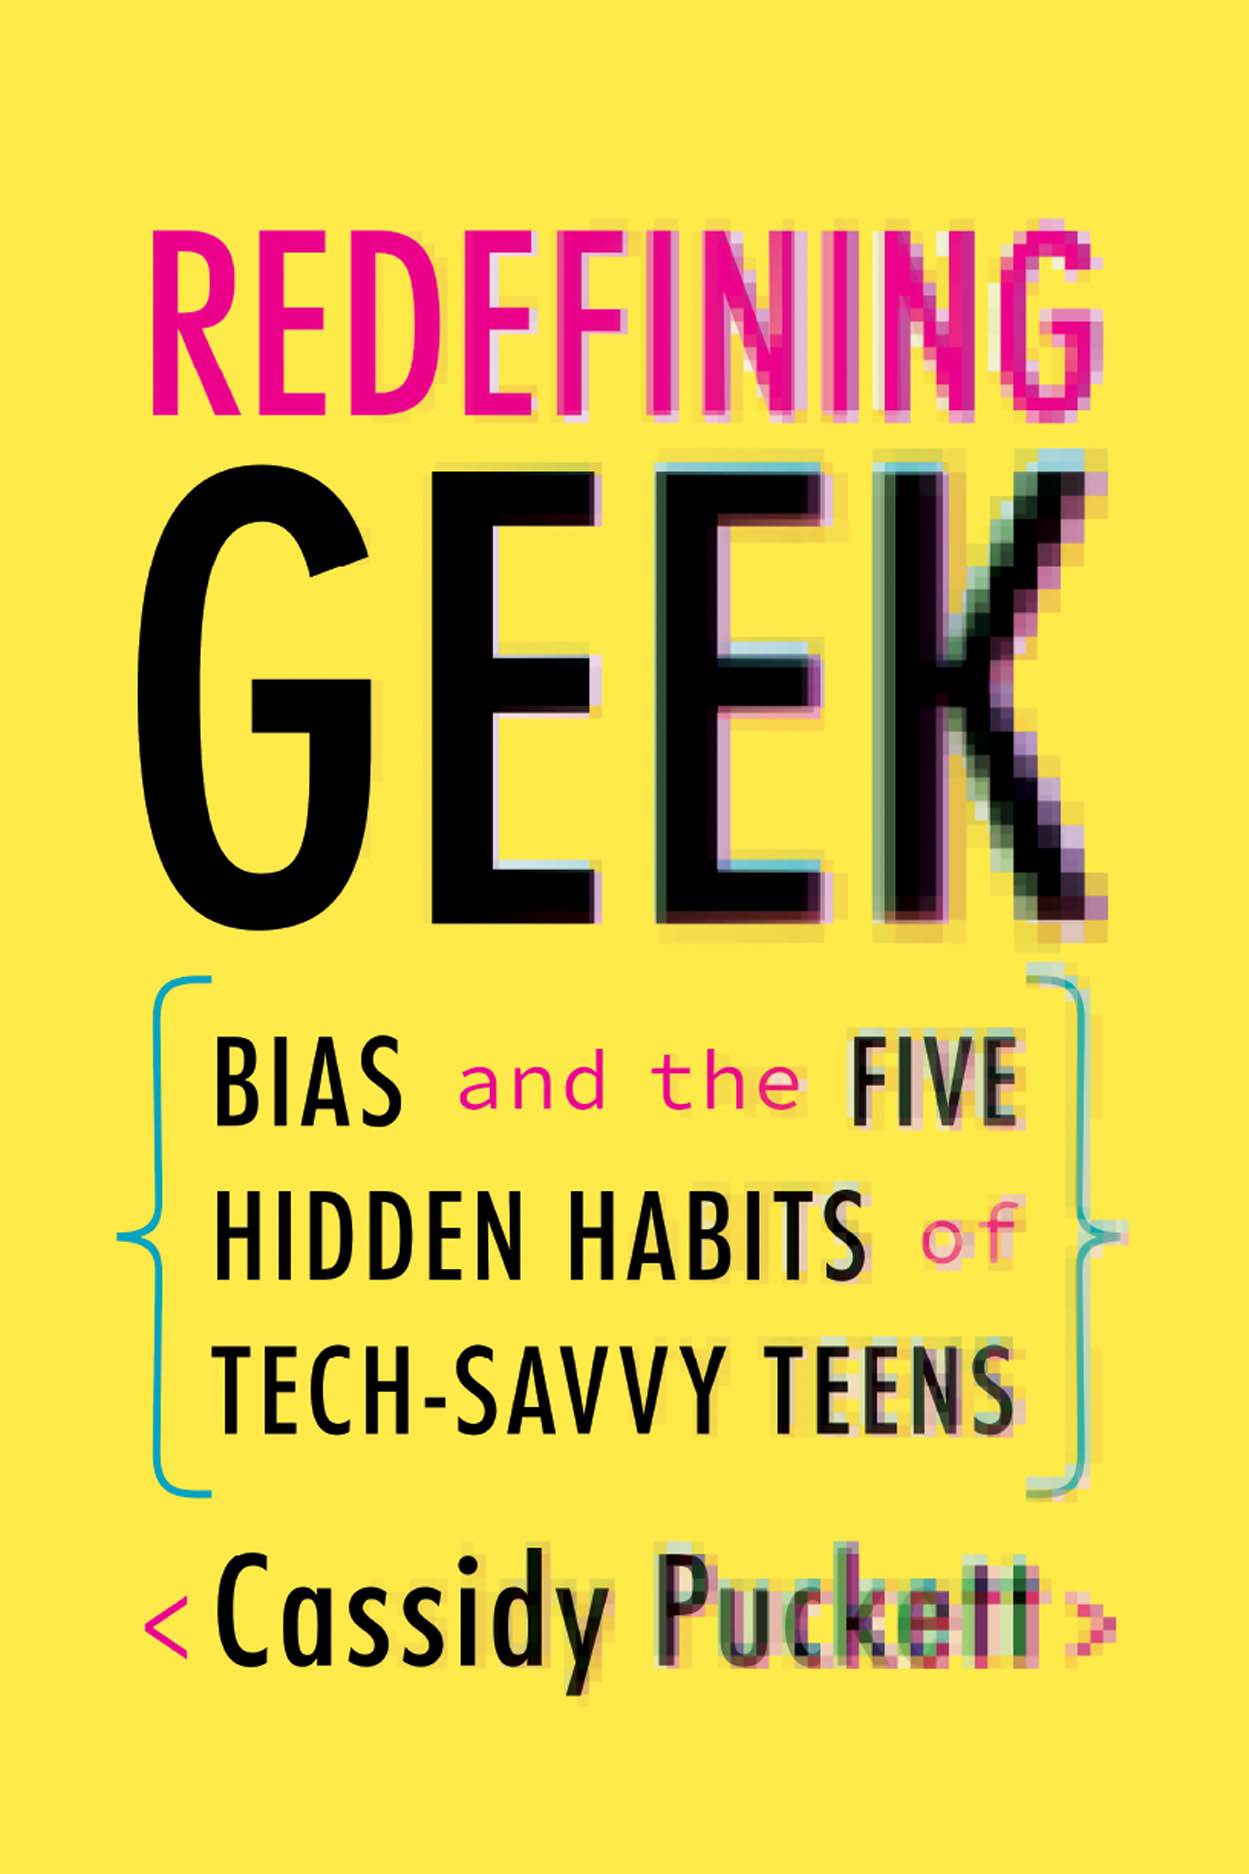 Redefining Geek: Bias and the Five Hidden Habits of Tech-Savvy